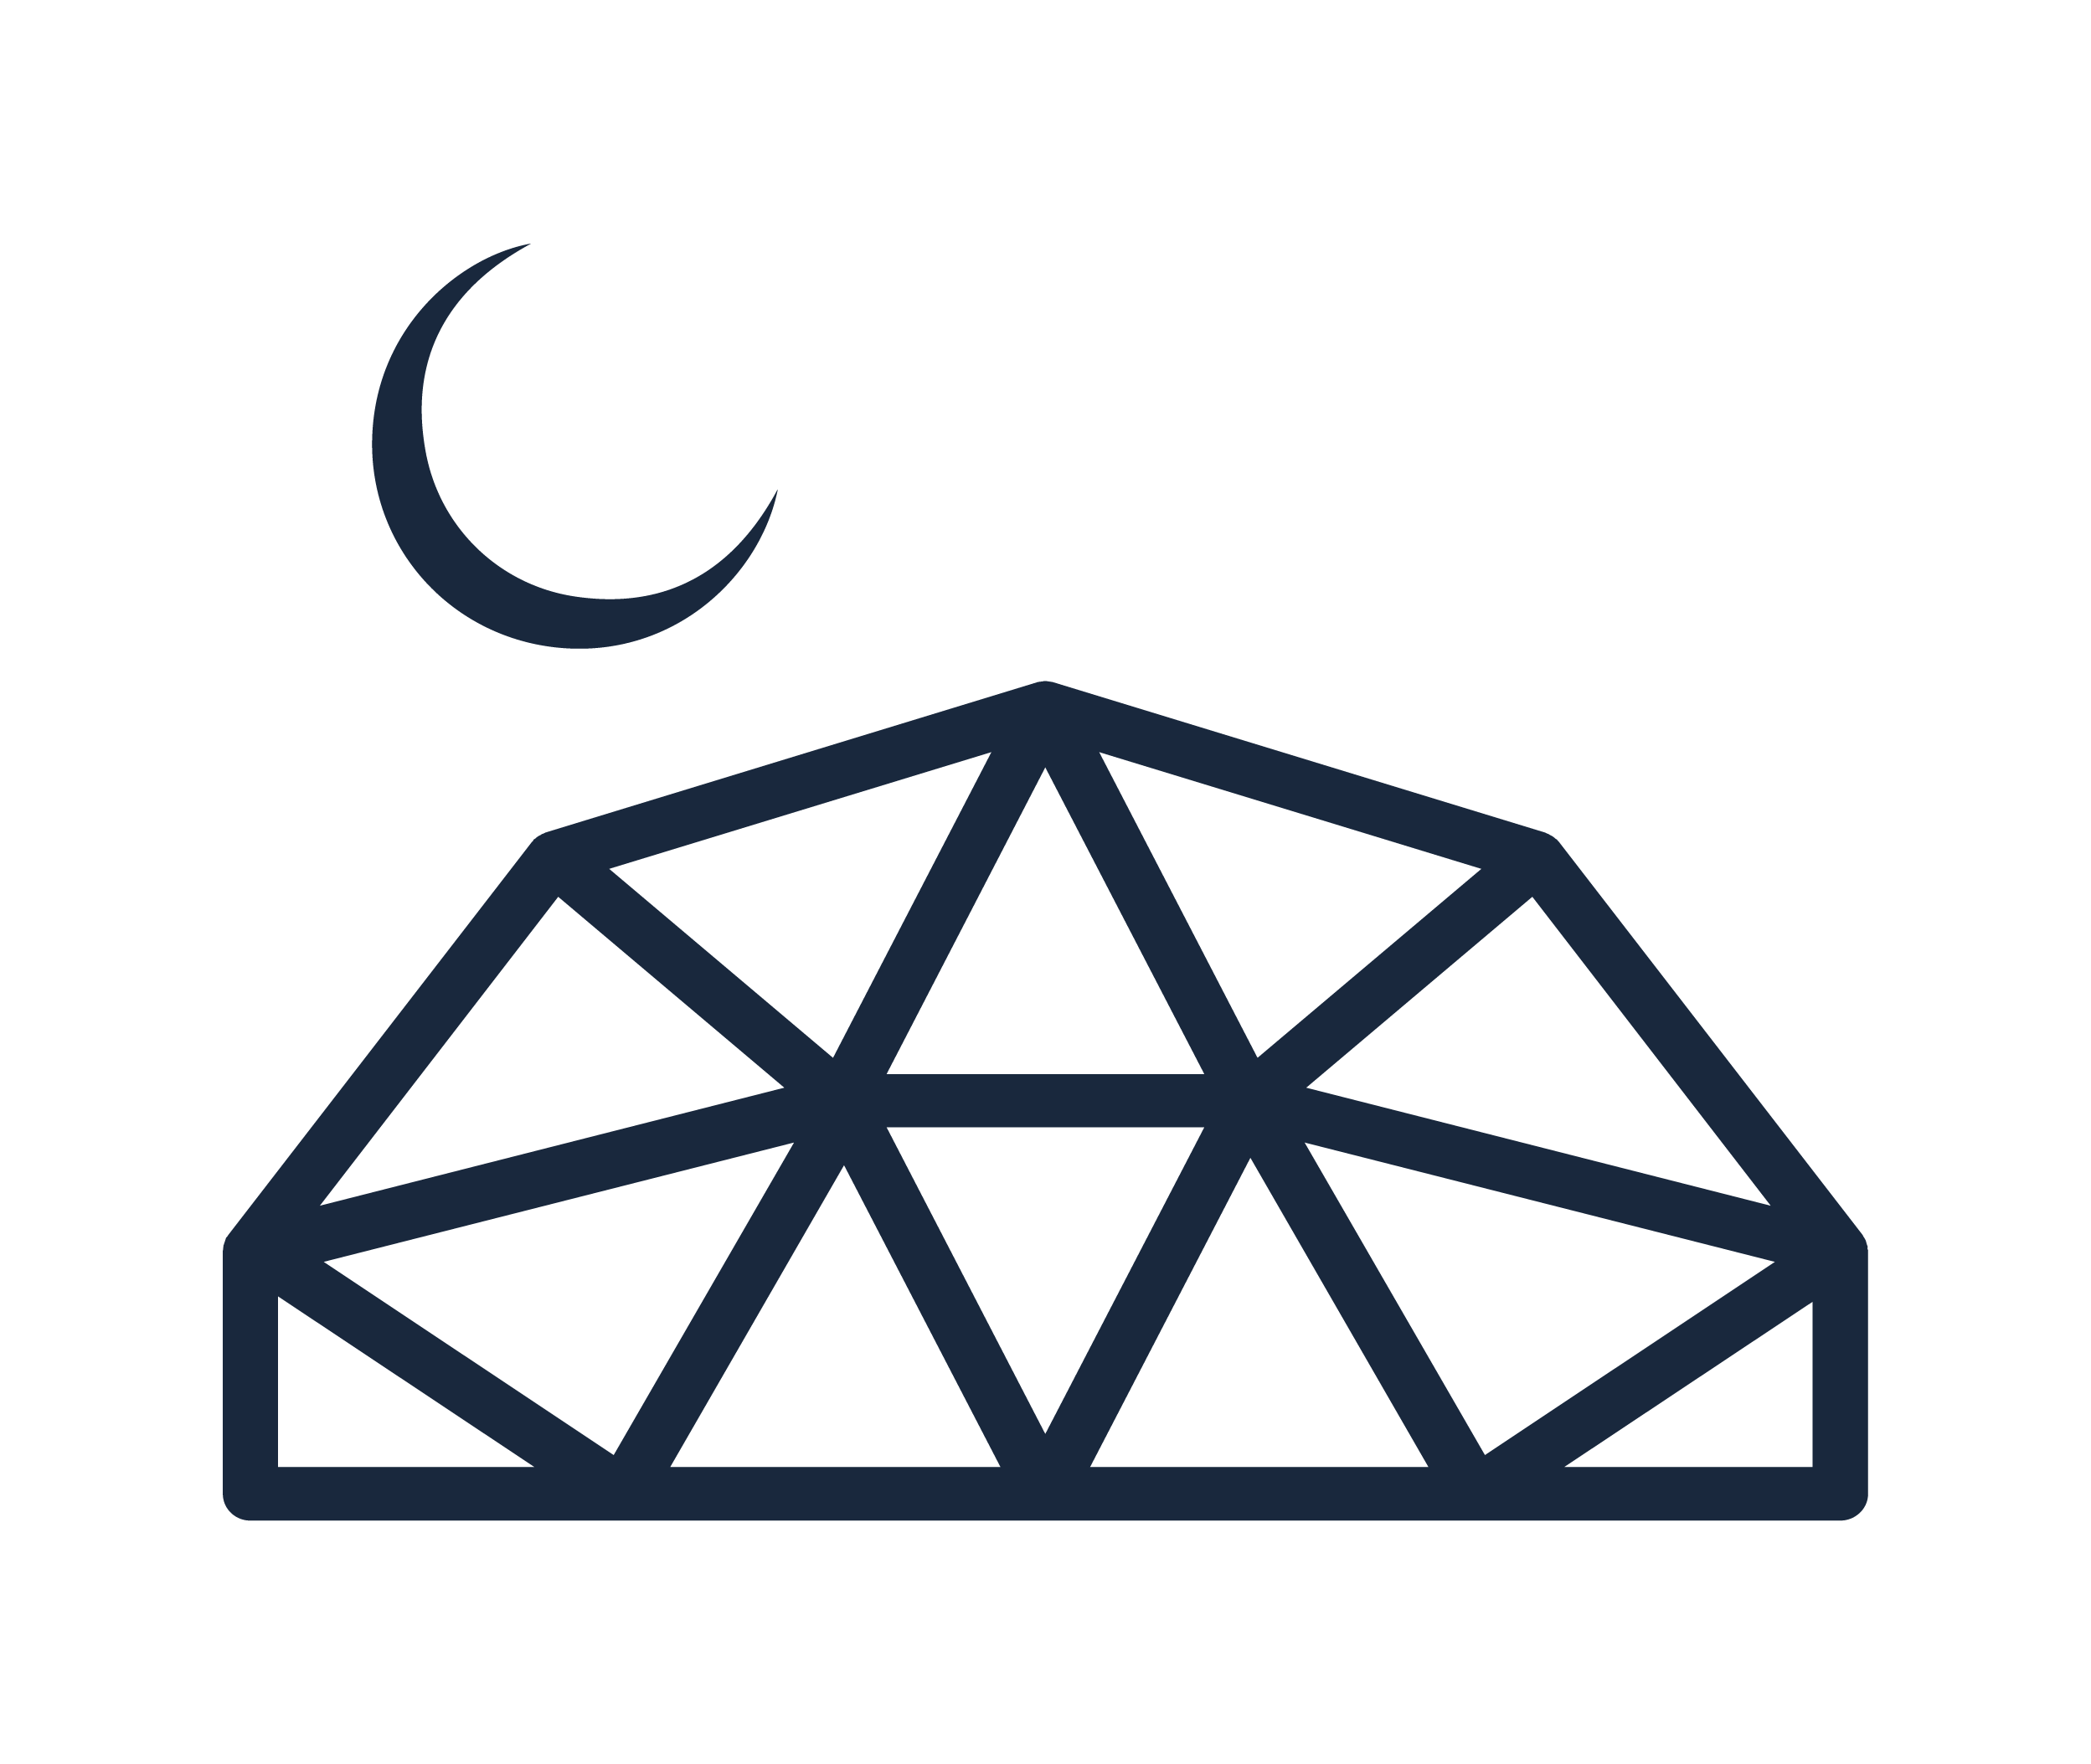 Sleep under the stars section marker icon